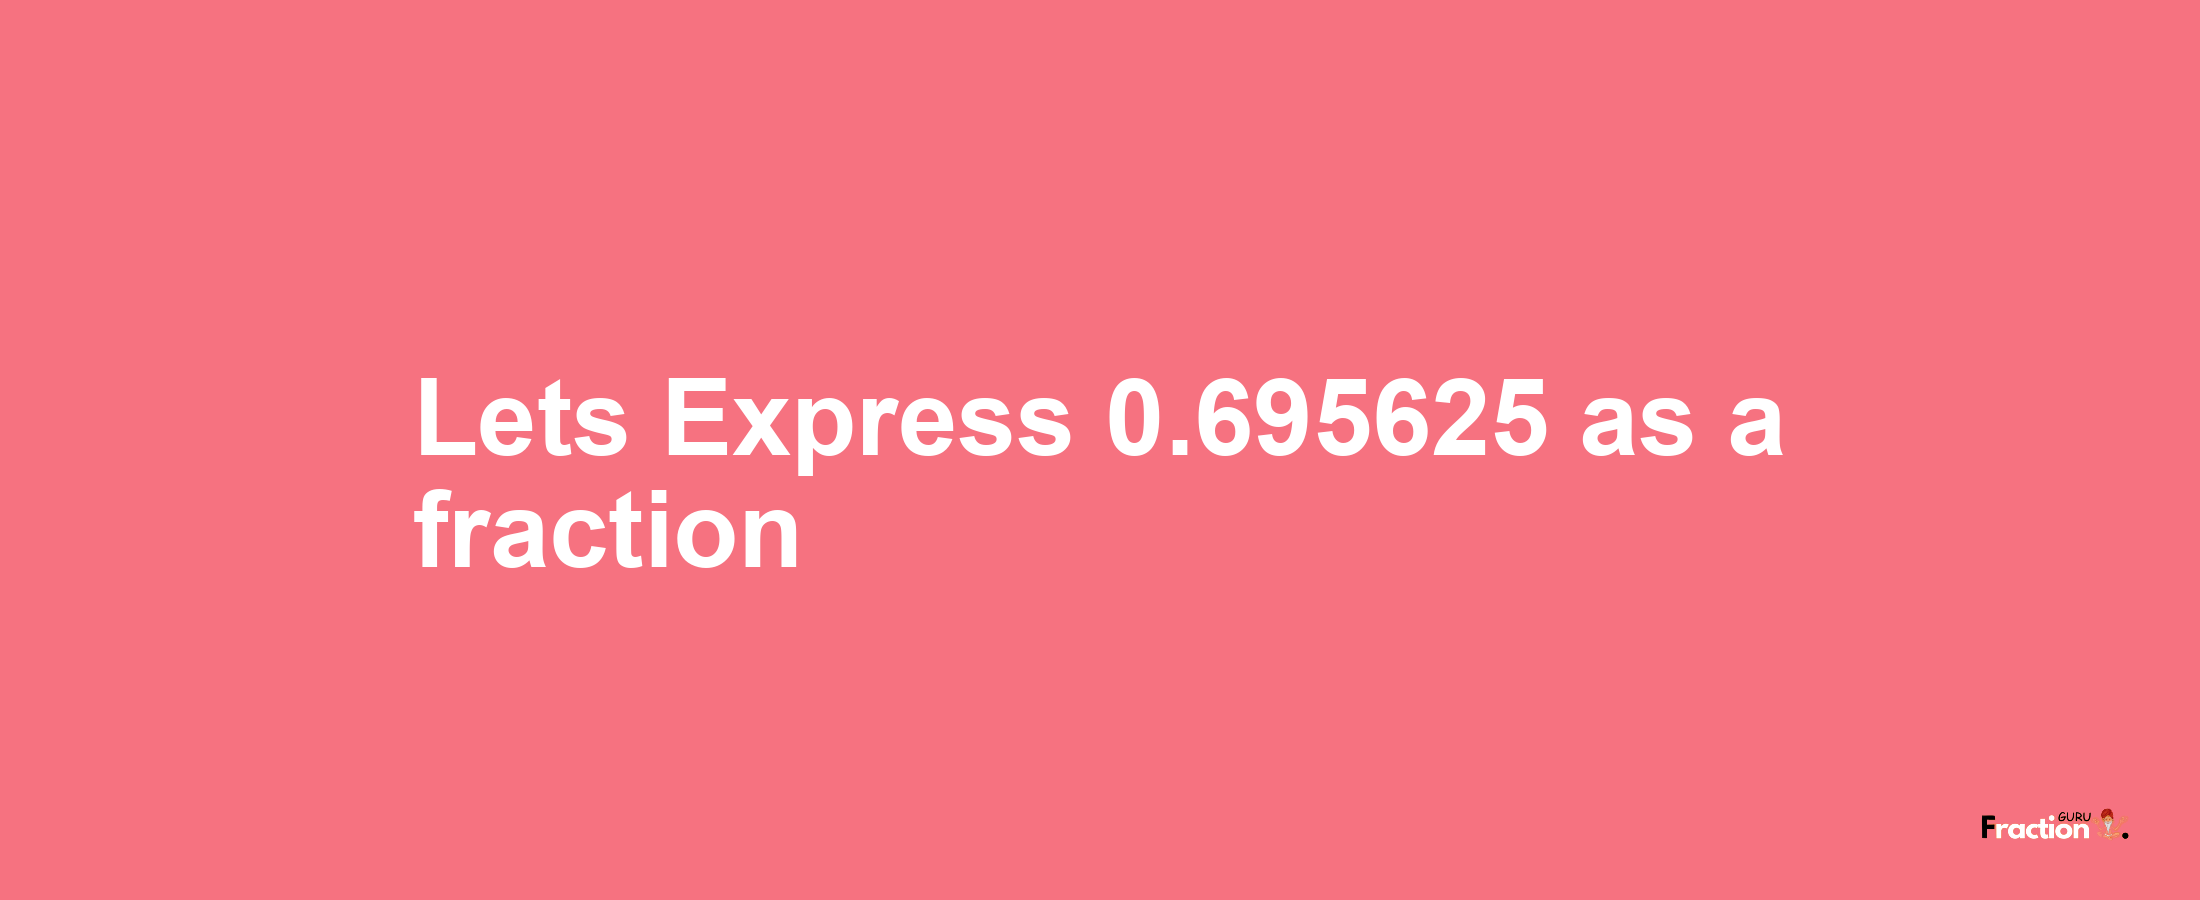 Lets Express 0.695625 as afraction